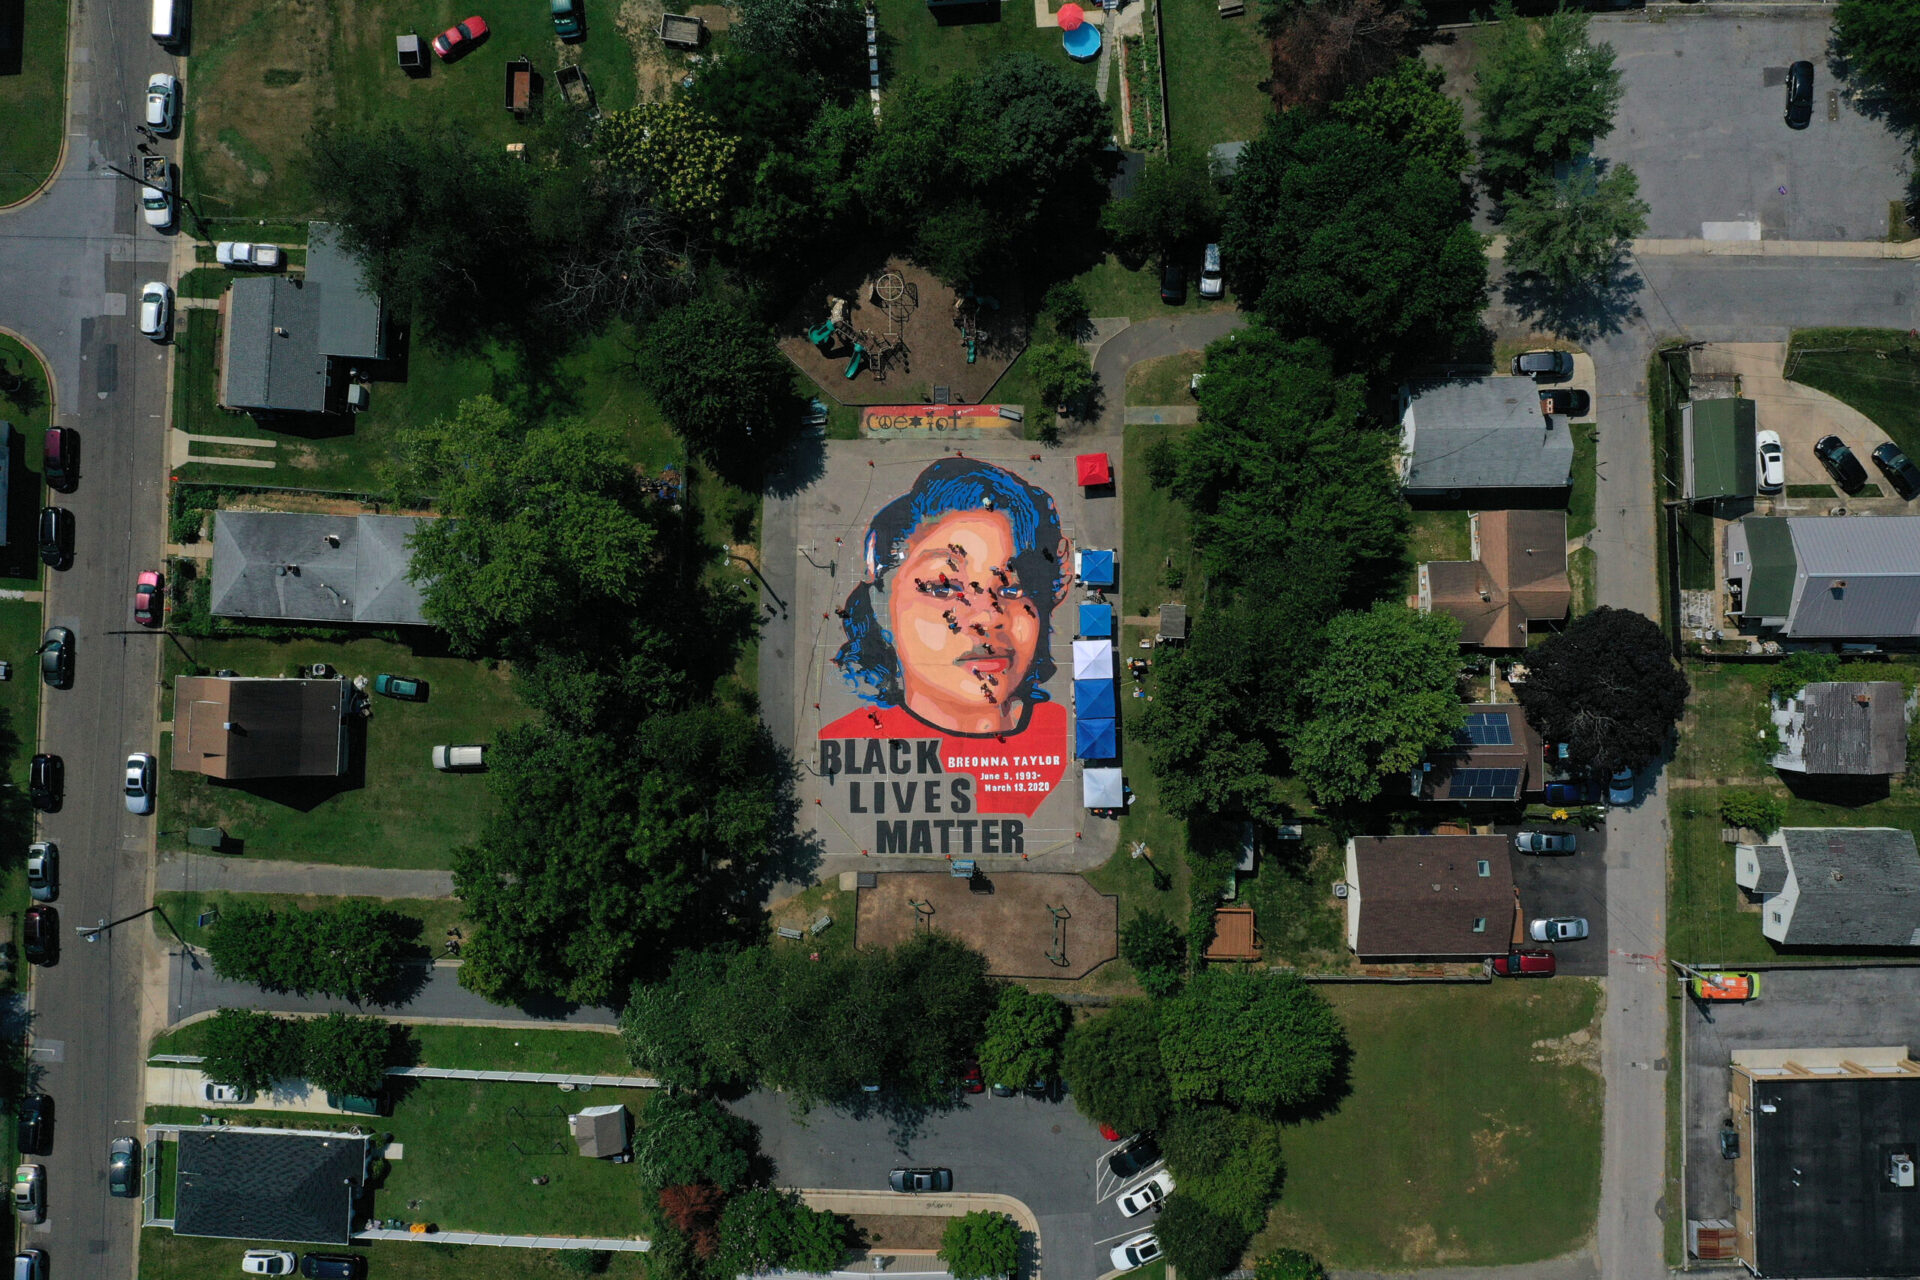 ANNAPOLIS, MARYLAND - JULY 05: In an aerial view from a drone, a large-scale ground mural depicting Breonna Taylor with the text 'Black Lives Matter' is seen being painted at Chambers Park on July 5, 2020 in Annapolis, Maryland. The mural was organized by Future History Now in partnership with Banneker-Douglass Museum and The Maryland Commission on African American History and Culture. The painting honors Breonna Taylor, who was shot and killed by members of the Louisville Metro Police Department in March 2020. (Photo by Patrick Smith/Getty Images)